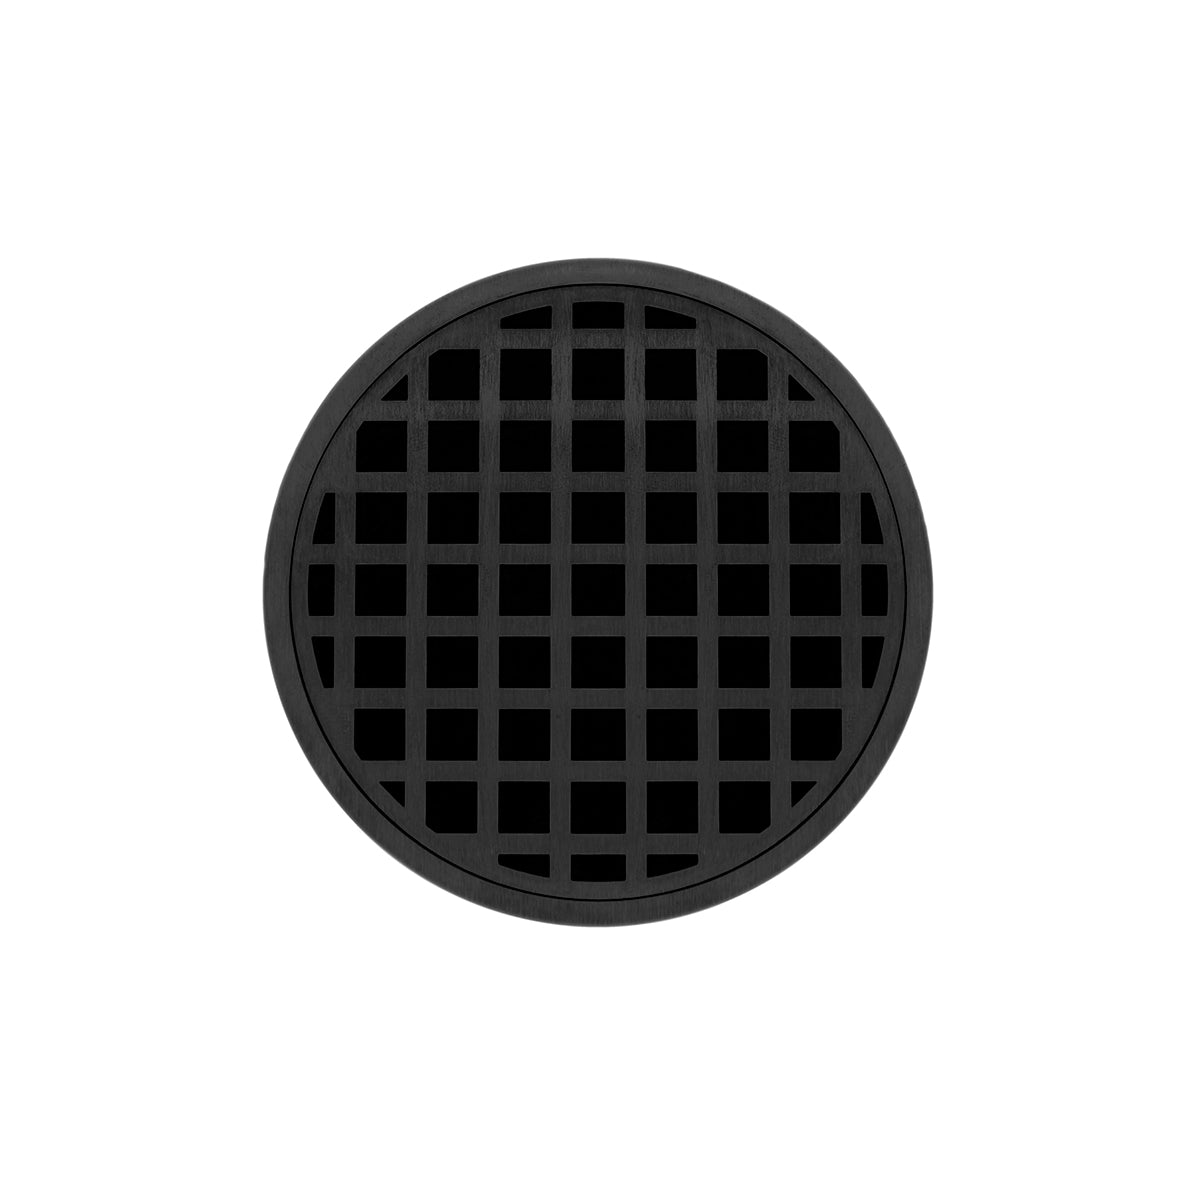 Infinity Drain 5" Round RQD 5 Premium Center Drain Kit with Squares Pattern Decorative Plate with PVC Drain Body, 2" Outlet